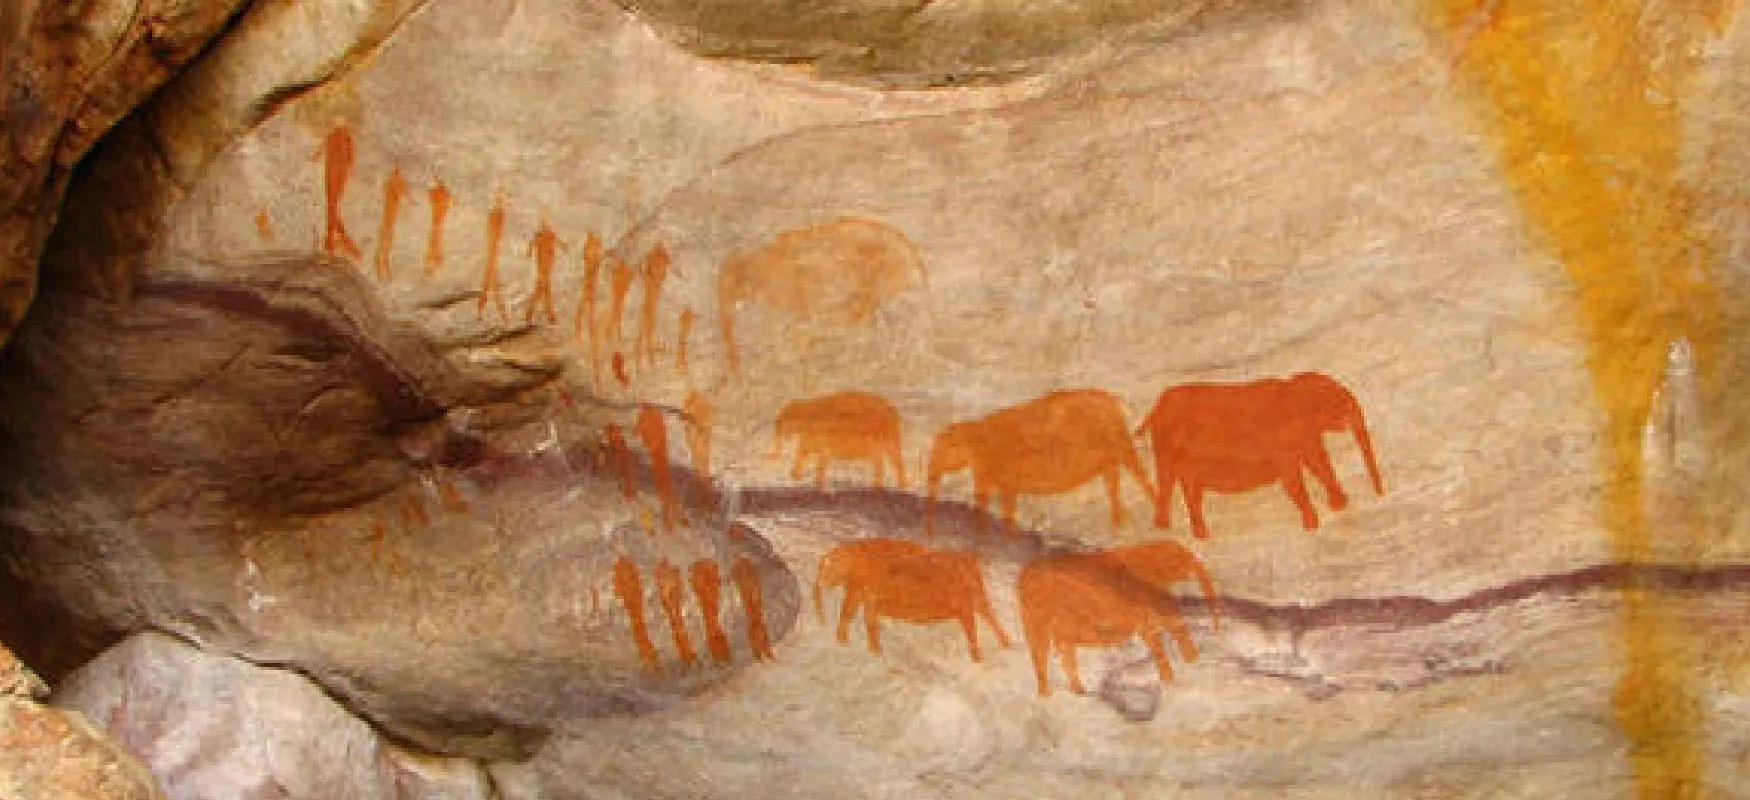 A photograph is shown of a curved, bumpy rock, cracked in some places, in various shades of brown and orange that fills the whole picture. On the rock are orange drawings and markings. On the left side there are about twenty drawings of people of various heights, drawn in rows. The people have heads and legs and some have arms, but otherwise show no details. On the right there are six elephants drawn in varying shades of orange. In the center of the image, a small elephant extends its trunk up. Other faded orange items are seen on the left.